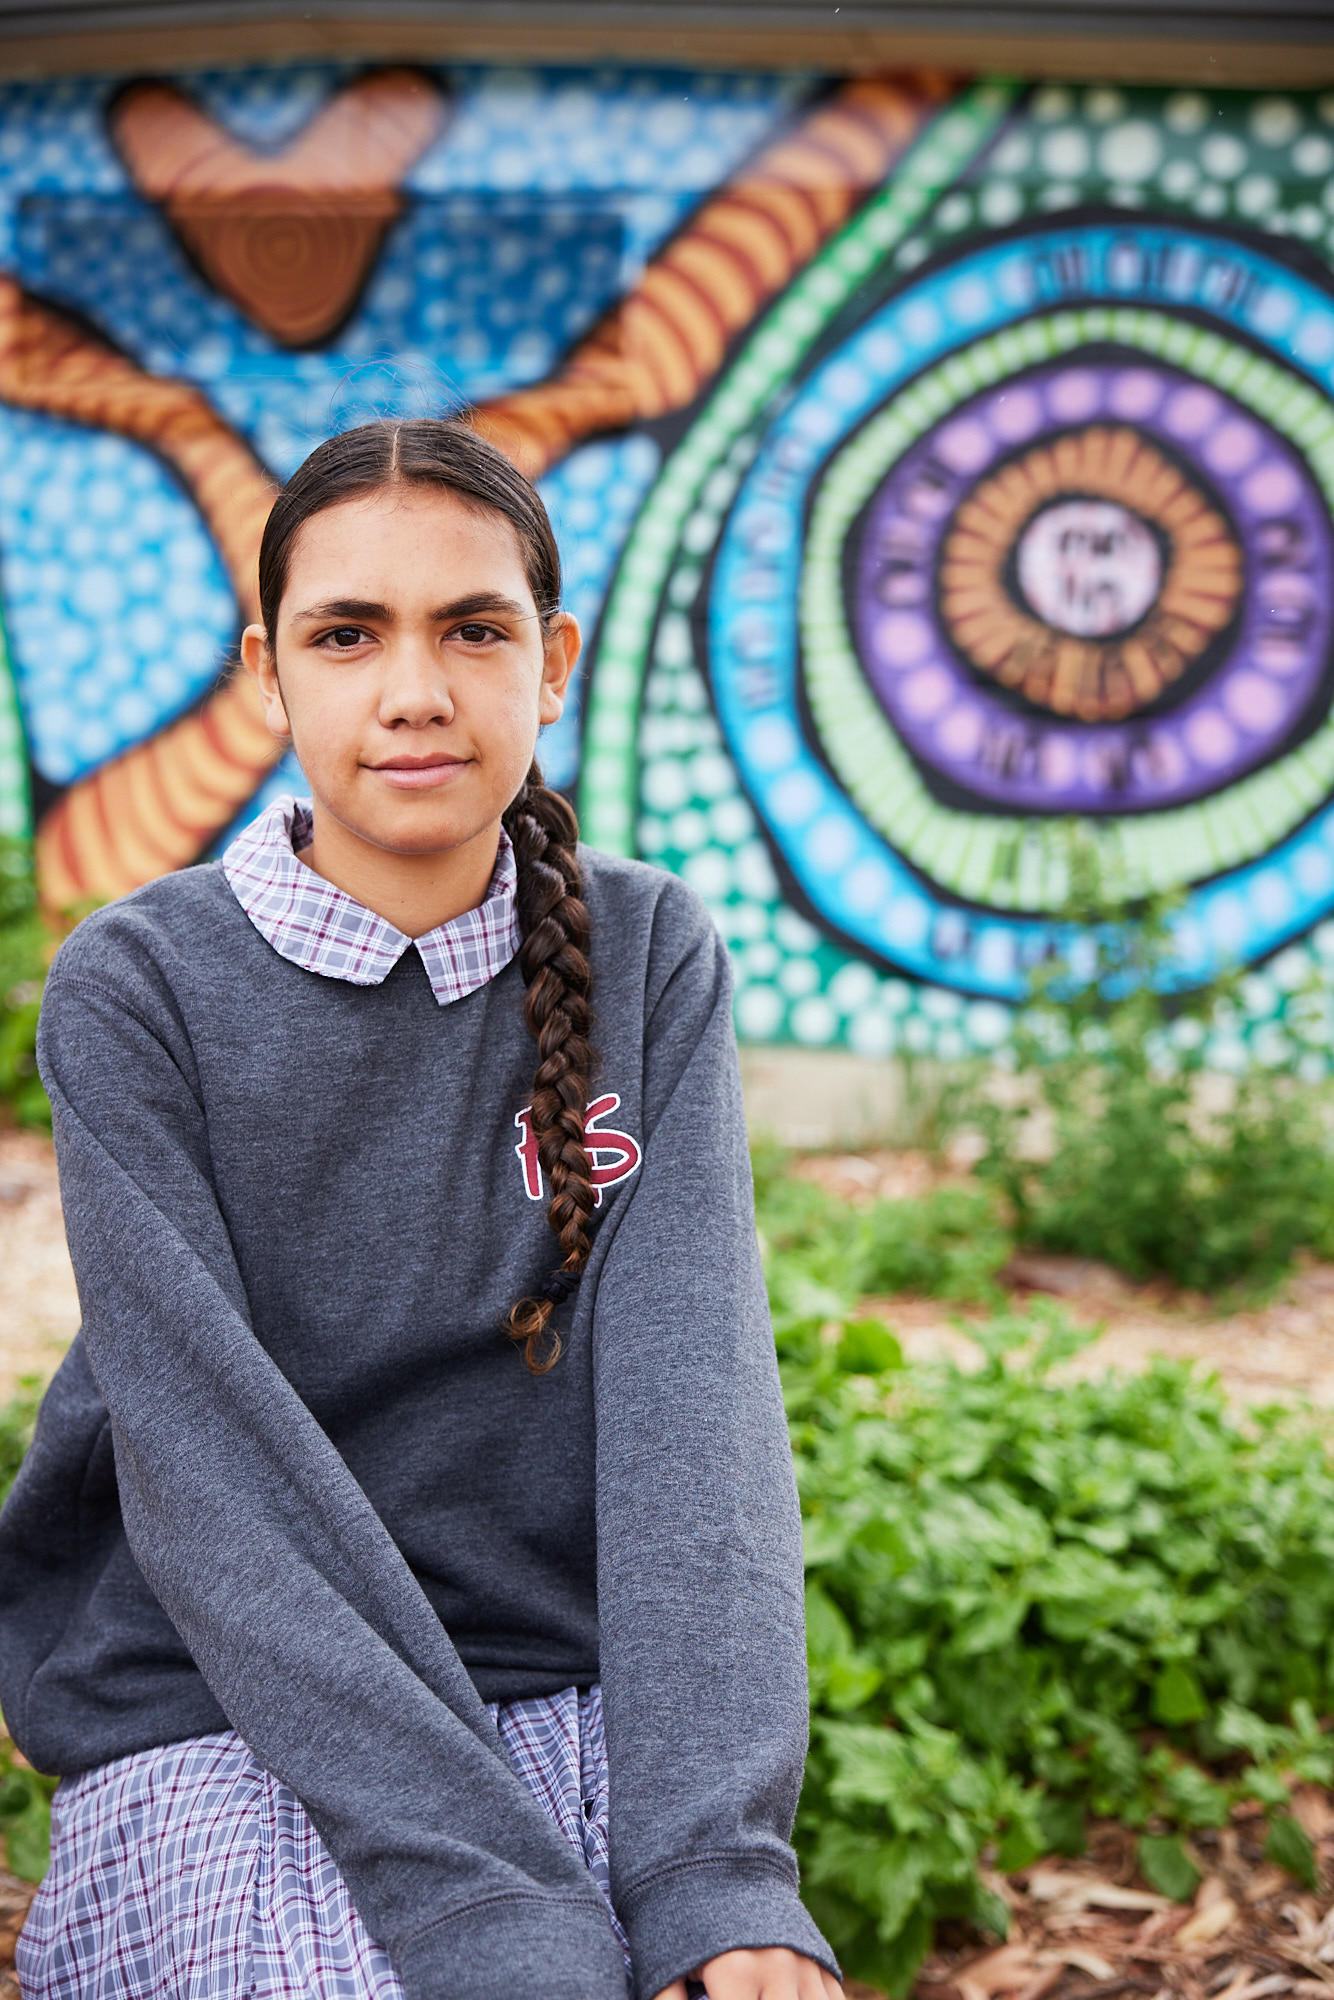 Student sitting and smiling in the Yarning circle with colourful Aboriginal artwork painted on building in the background